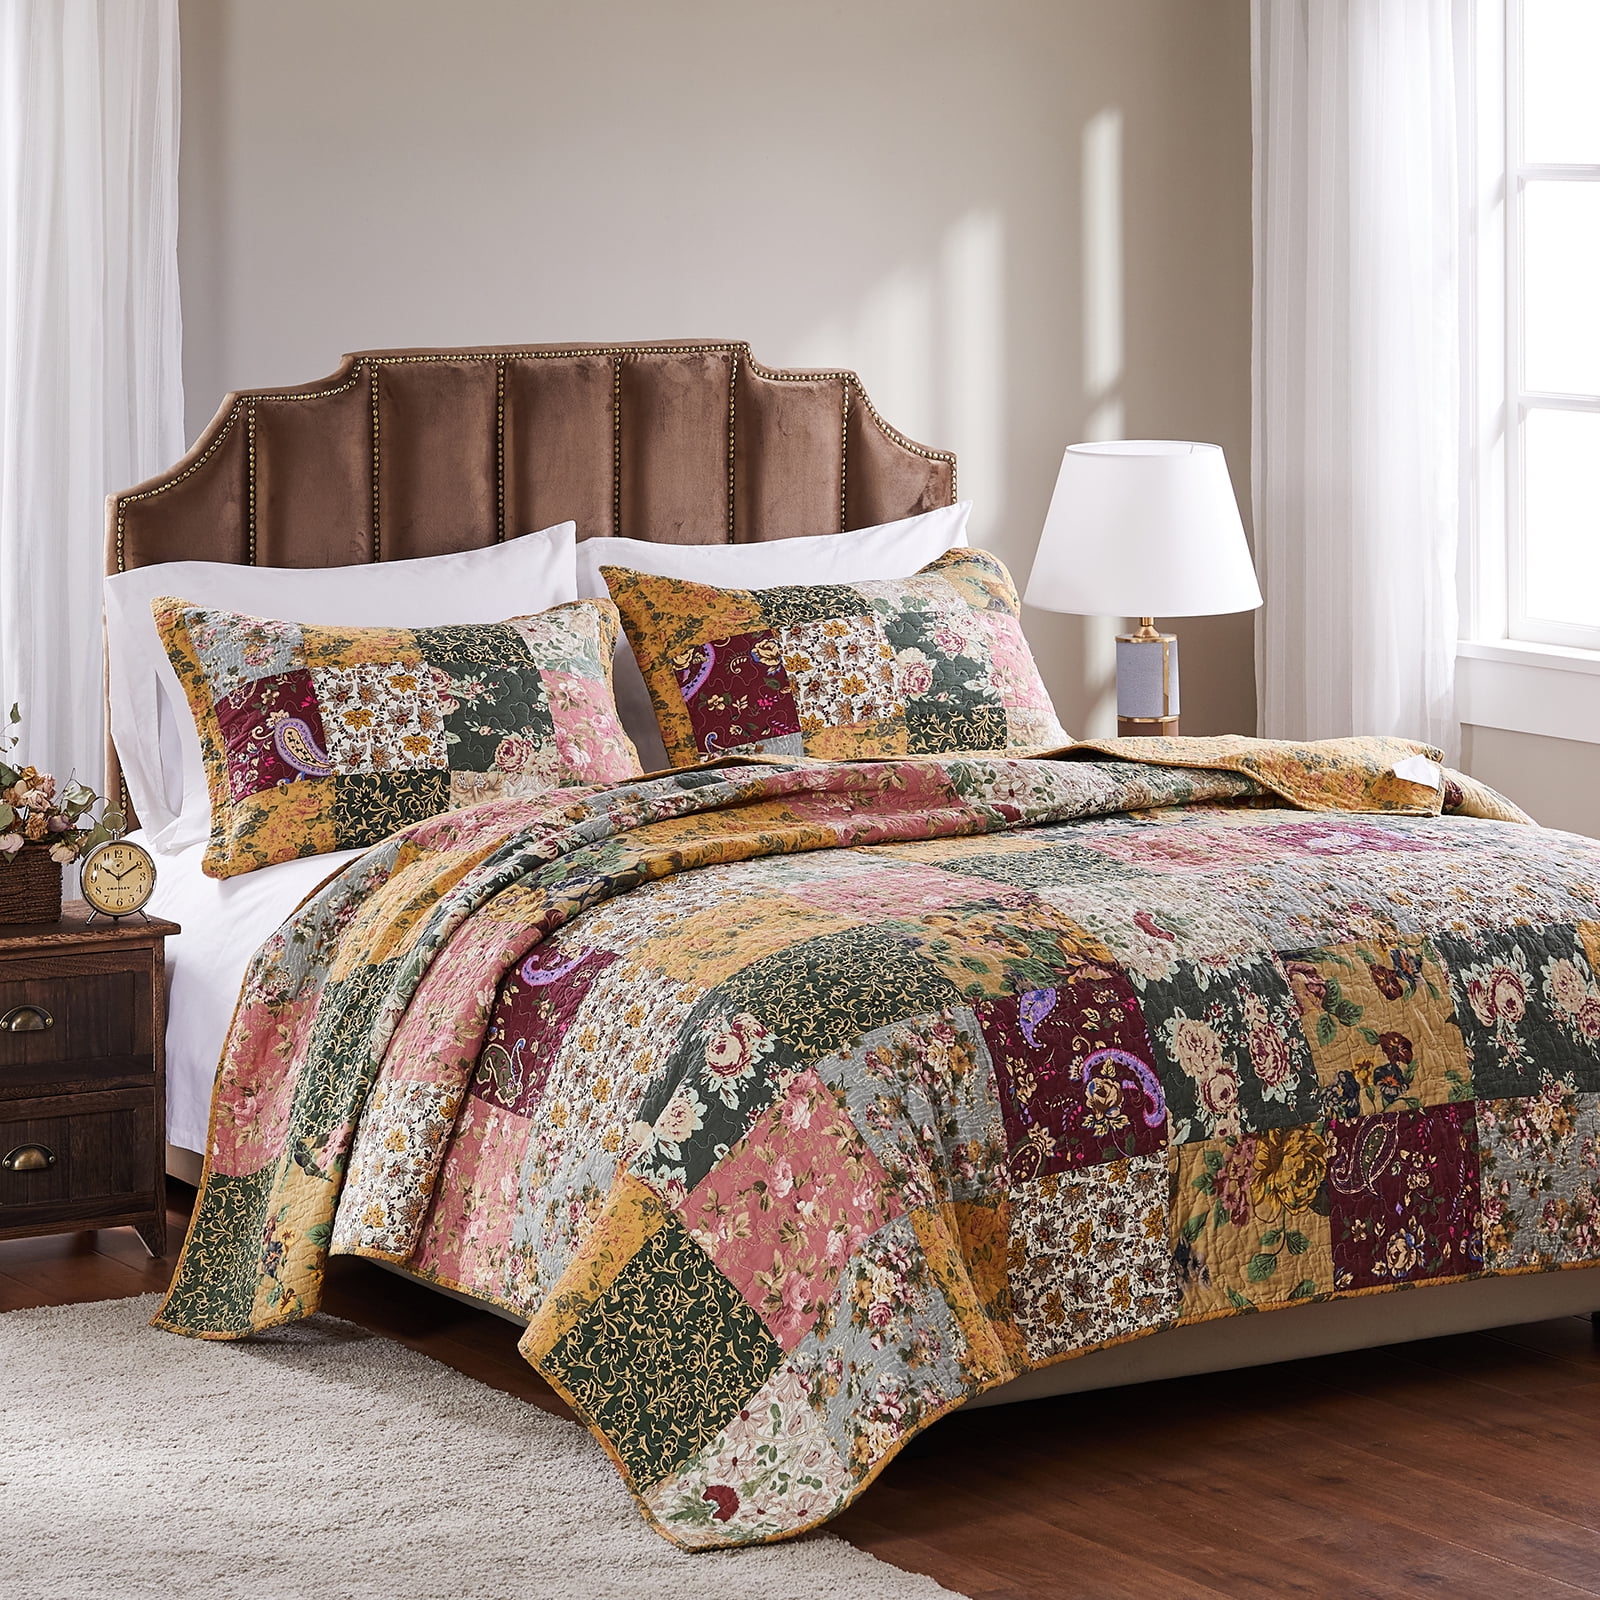 Details about   Coastal Quilt Set Queen Linen Color Bed Cover Seashell Comforter Home Bedding 